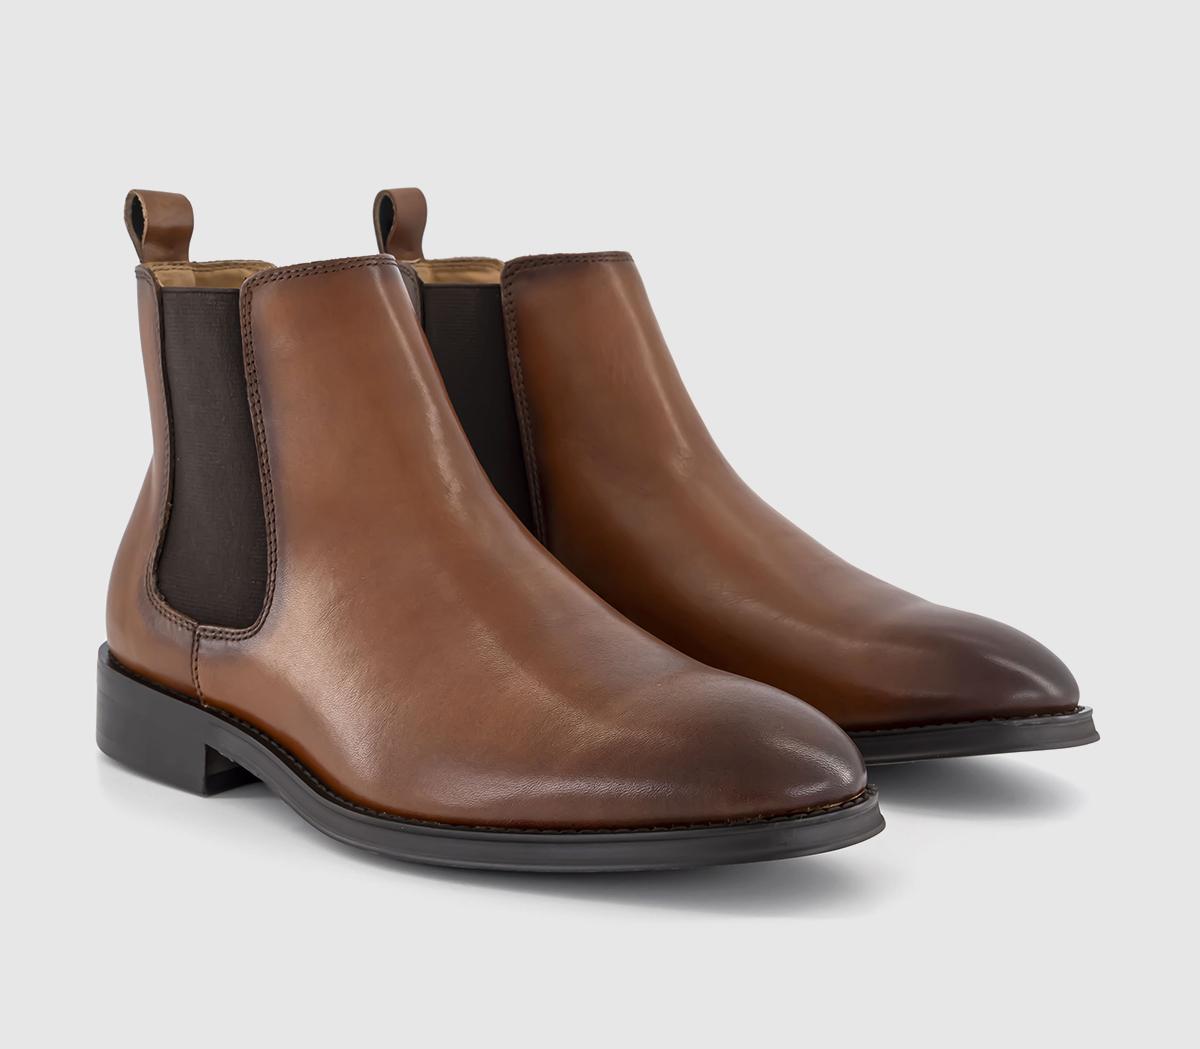 OFFICE Blenheim Chelsea Boots Tan Leather, 7